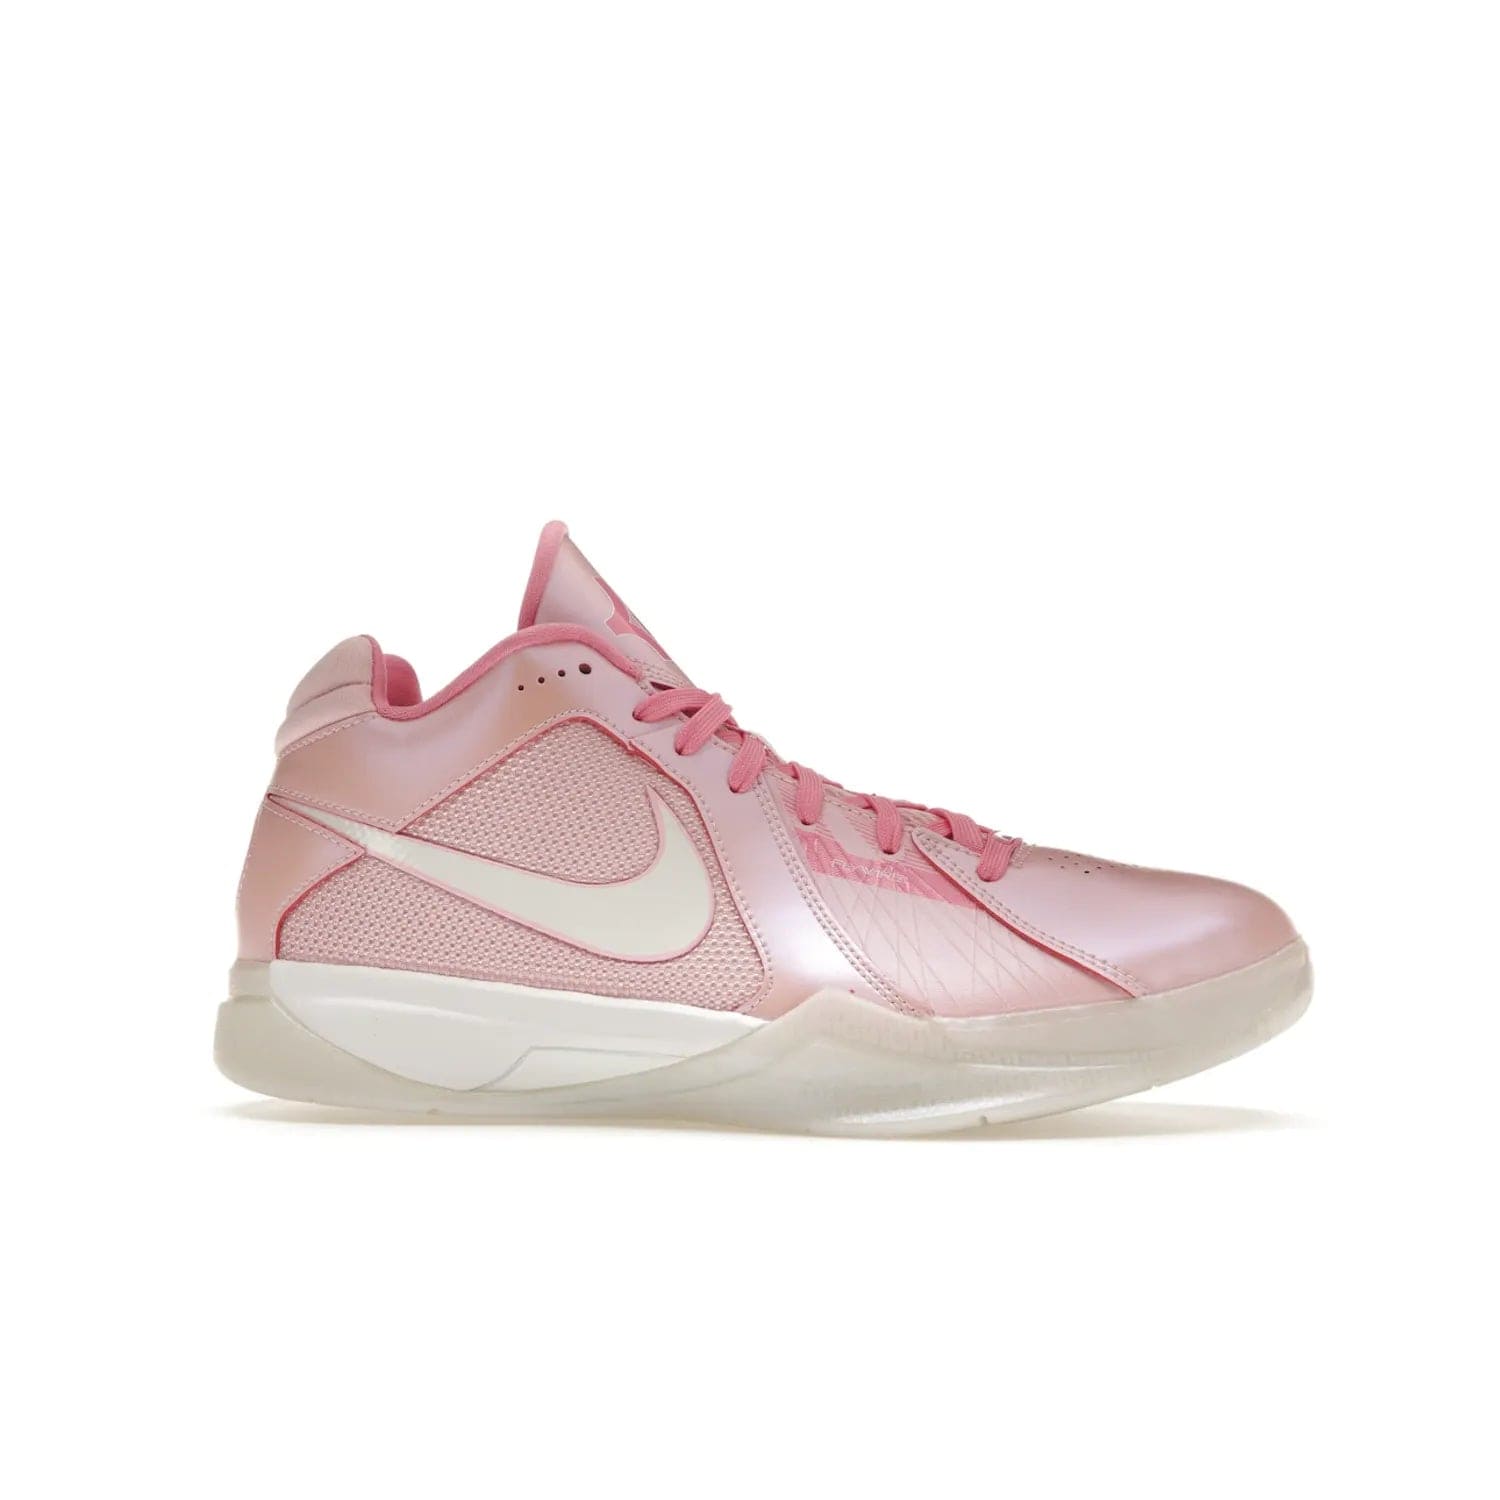 Nike KD 3 Aunt Pearl - Image 2 - Only at www.BallersClubKickz.com - Introducing the Nike KD 3 Aunt Pearl. Featuring a bold Medium Soft Pink, White, & Lotus Pink colorway. Get ready to stand out this October 15th.